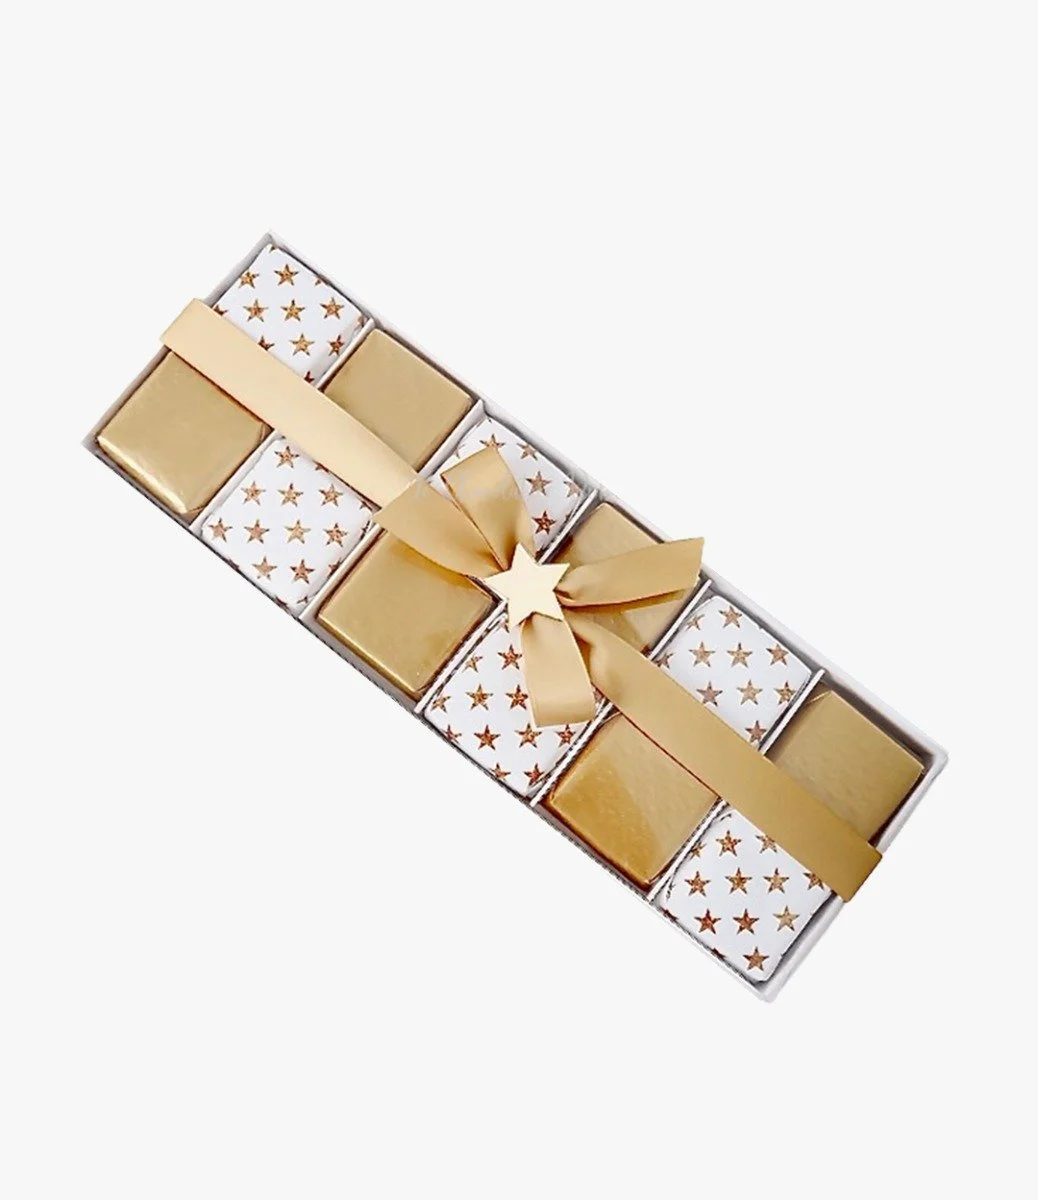 Luxury Star Design Chocolate Top View Box by Le Chocolatier